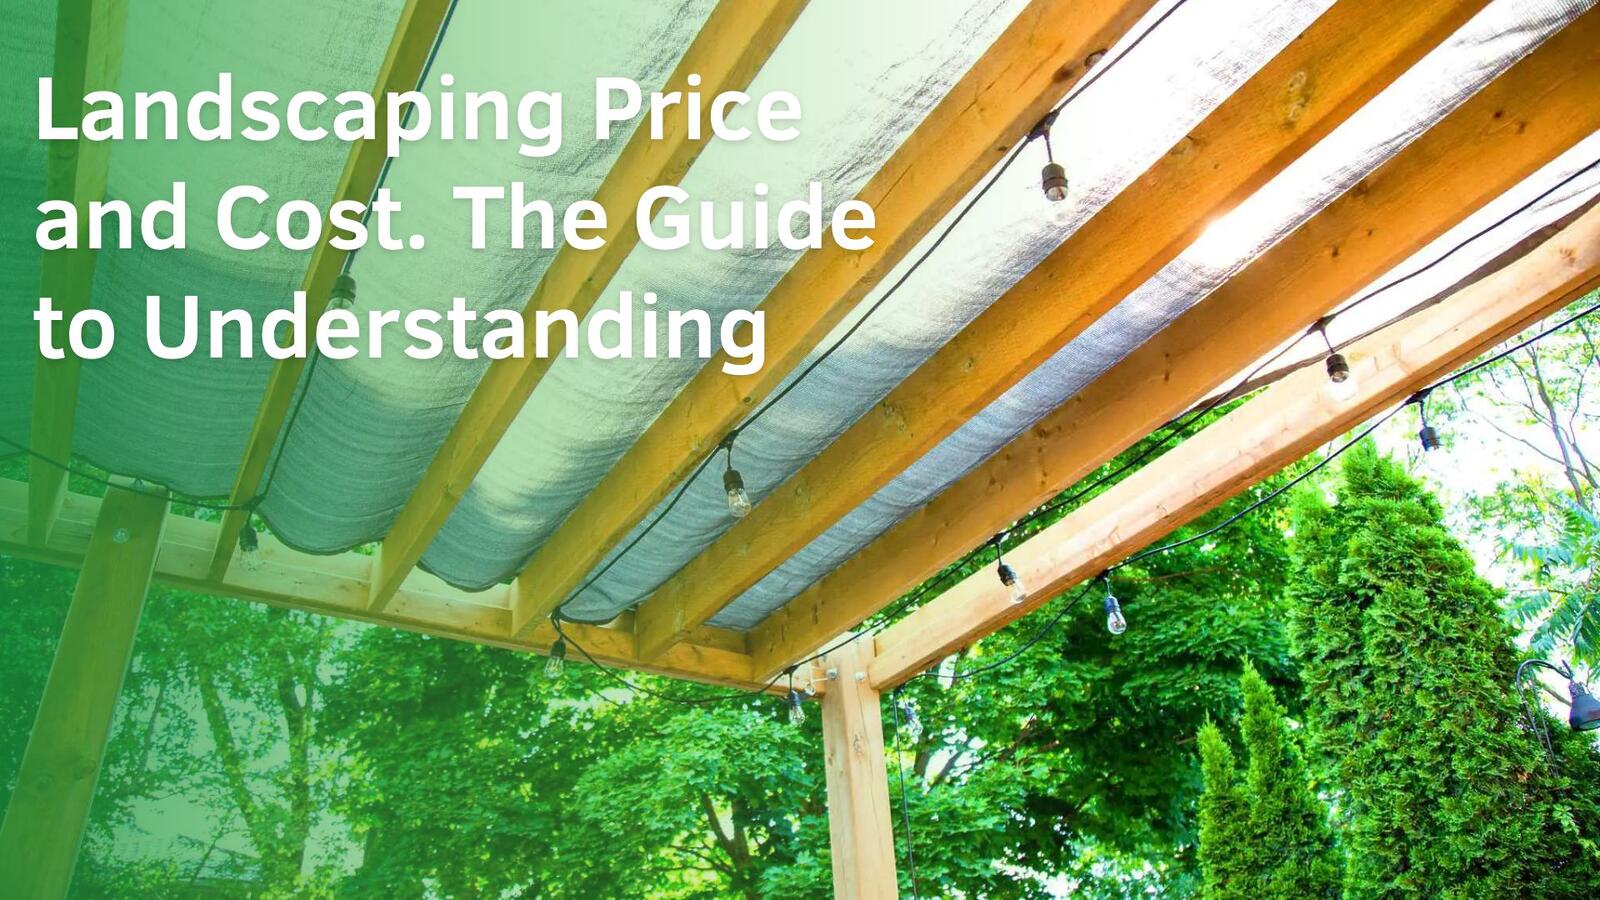 Landscaping Price and Cost. The Guide to Understanding